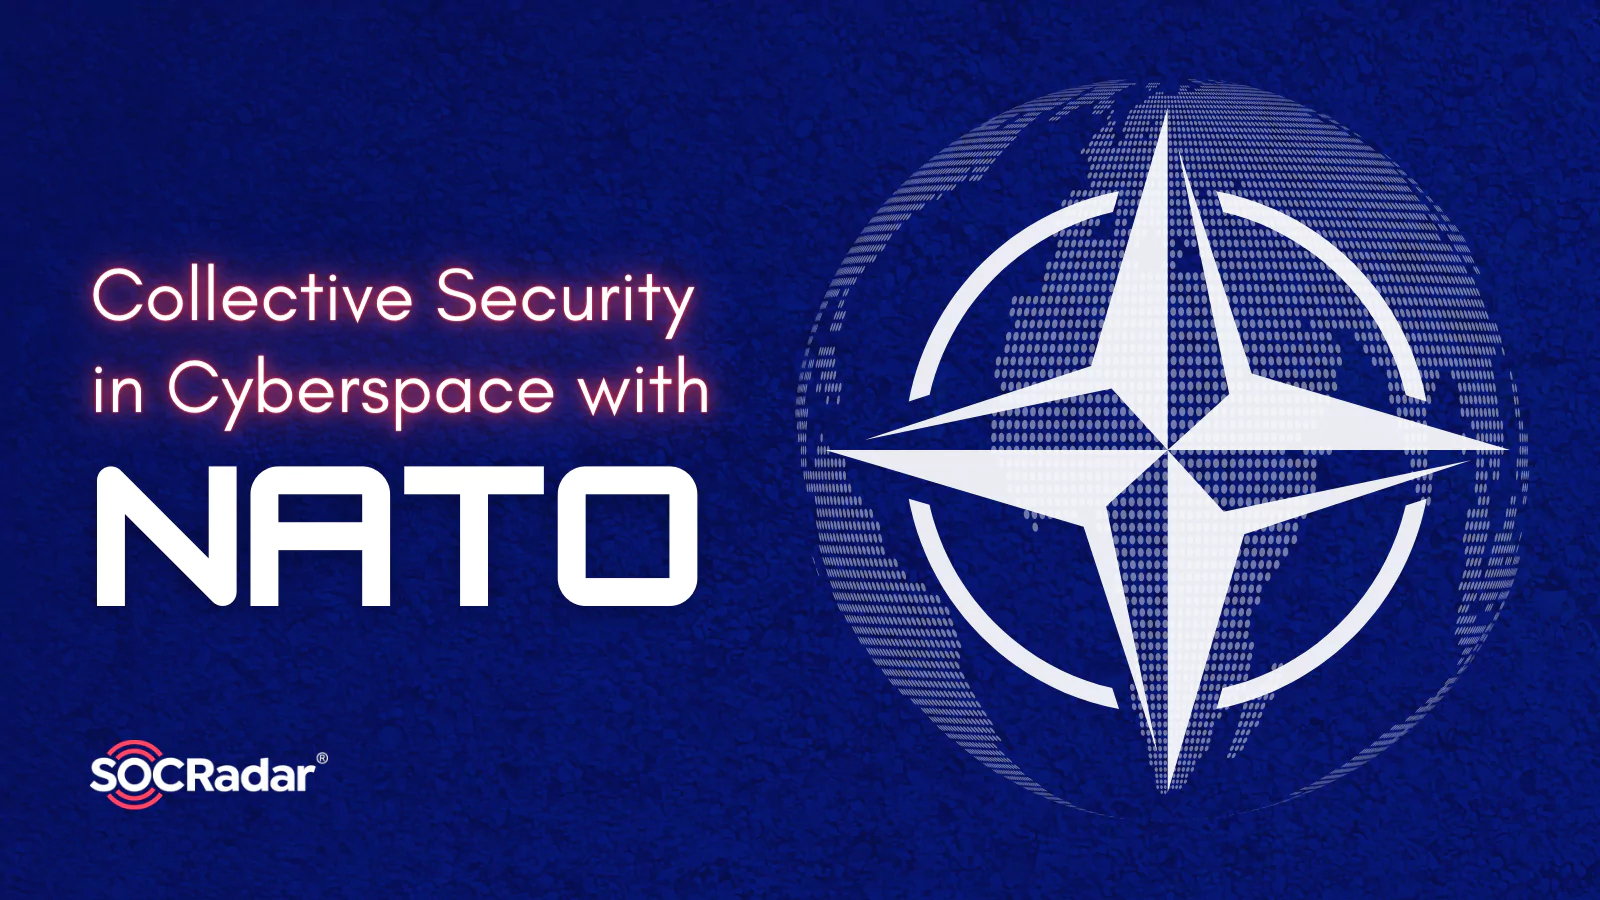 SOCRadar® Cyber Intelligence Inc. | Collective Security in Cyberspace with NATO